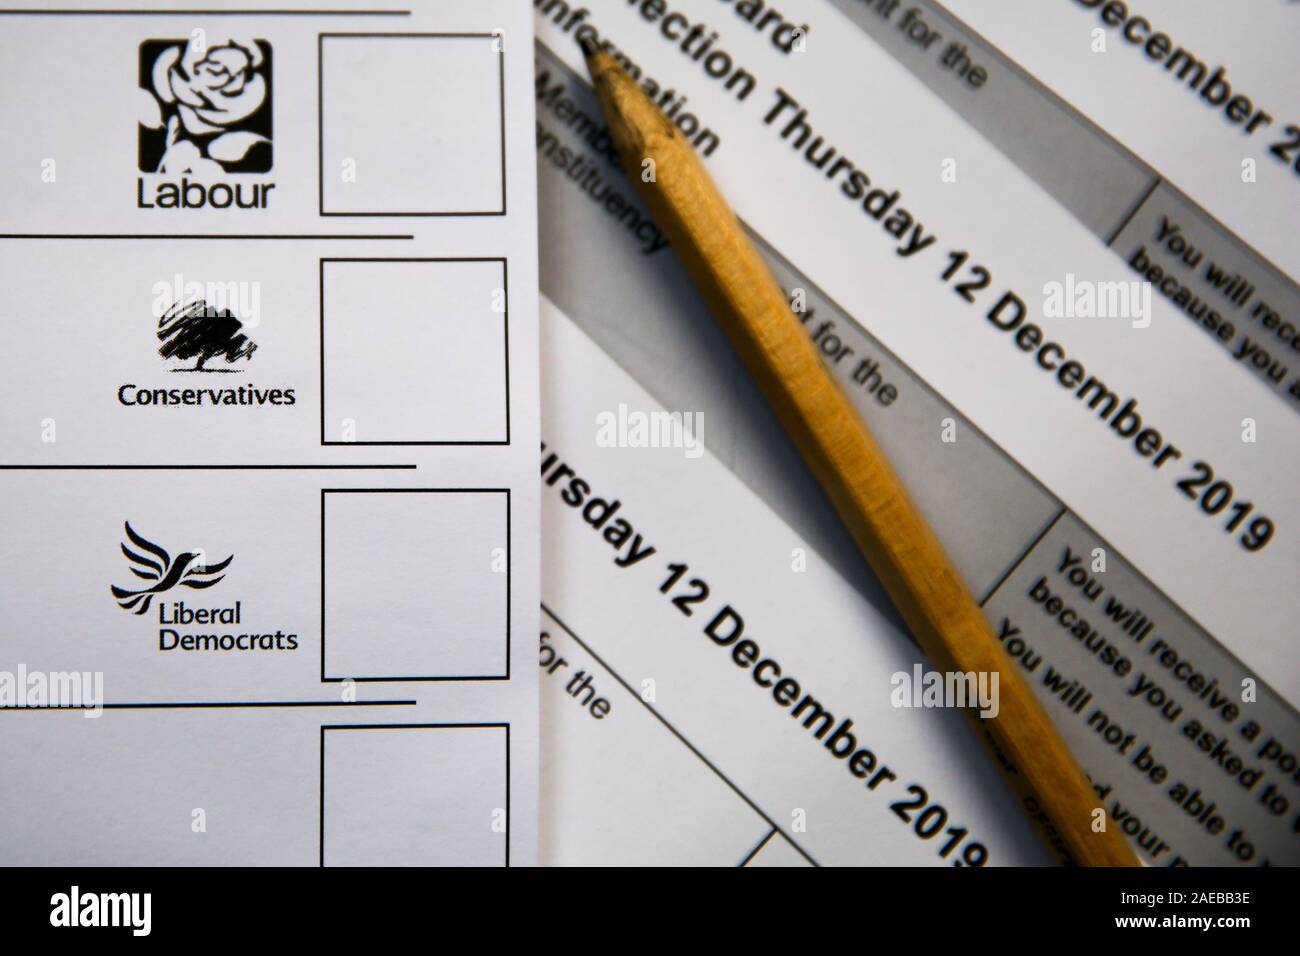 London, UK. 8th Dec, 2019. A ballot Paper seen displayed showing logos of Labour Party, Conservative Party and Liberal Democrats. Credit: Dinendra Haria/SOPA Images/ZUMA Wire/Alamy Live News Stock Photo